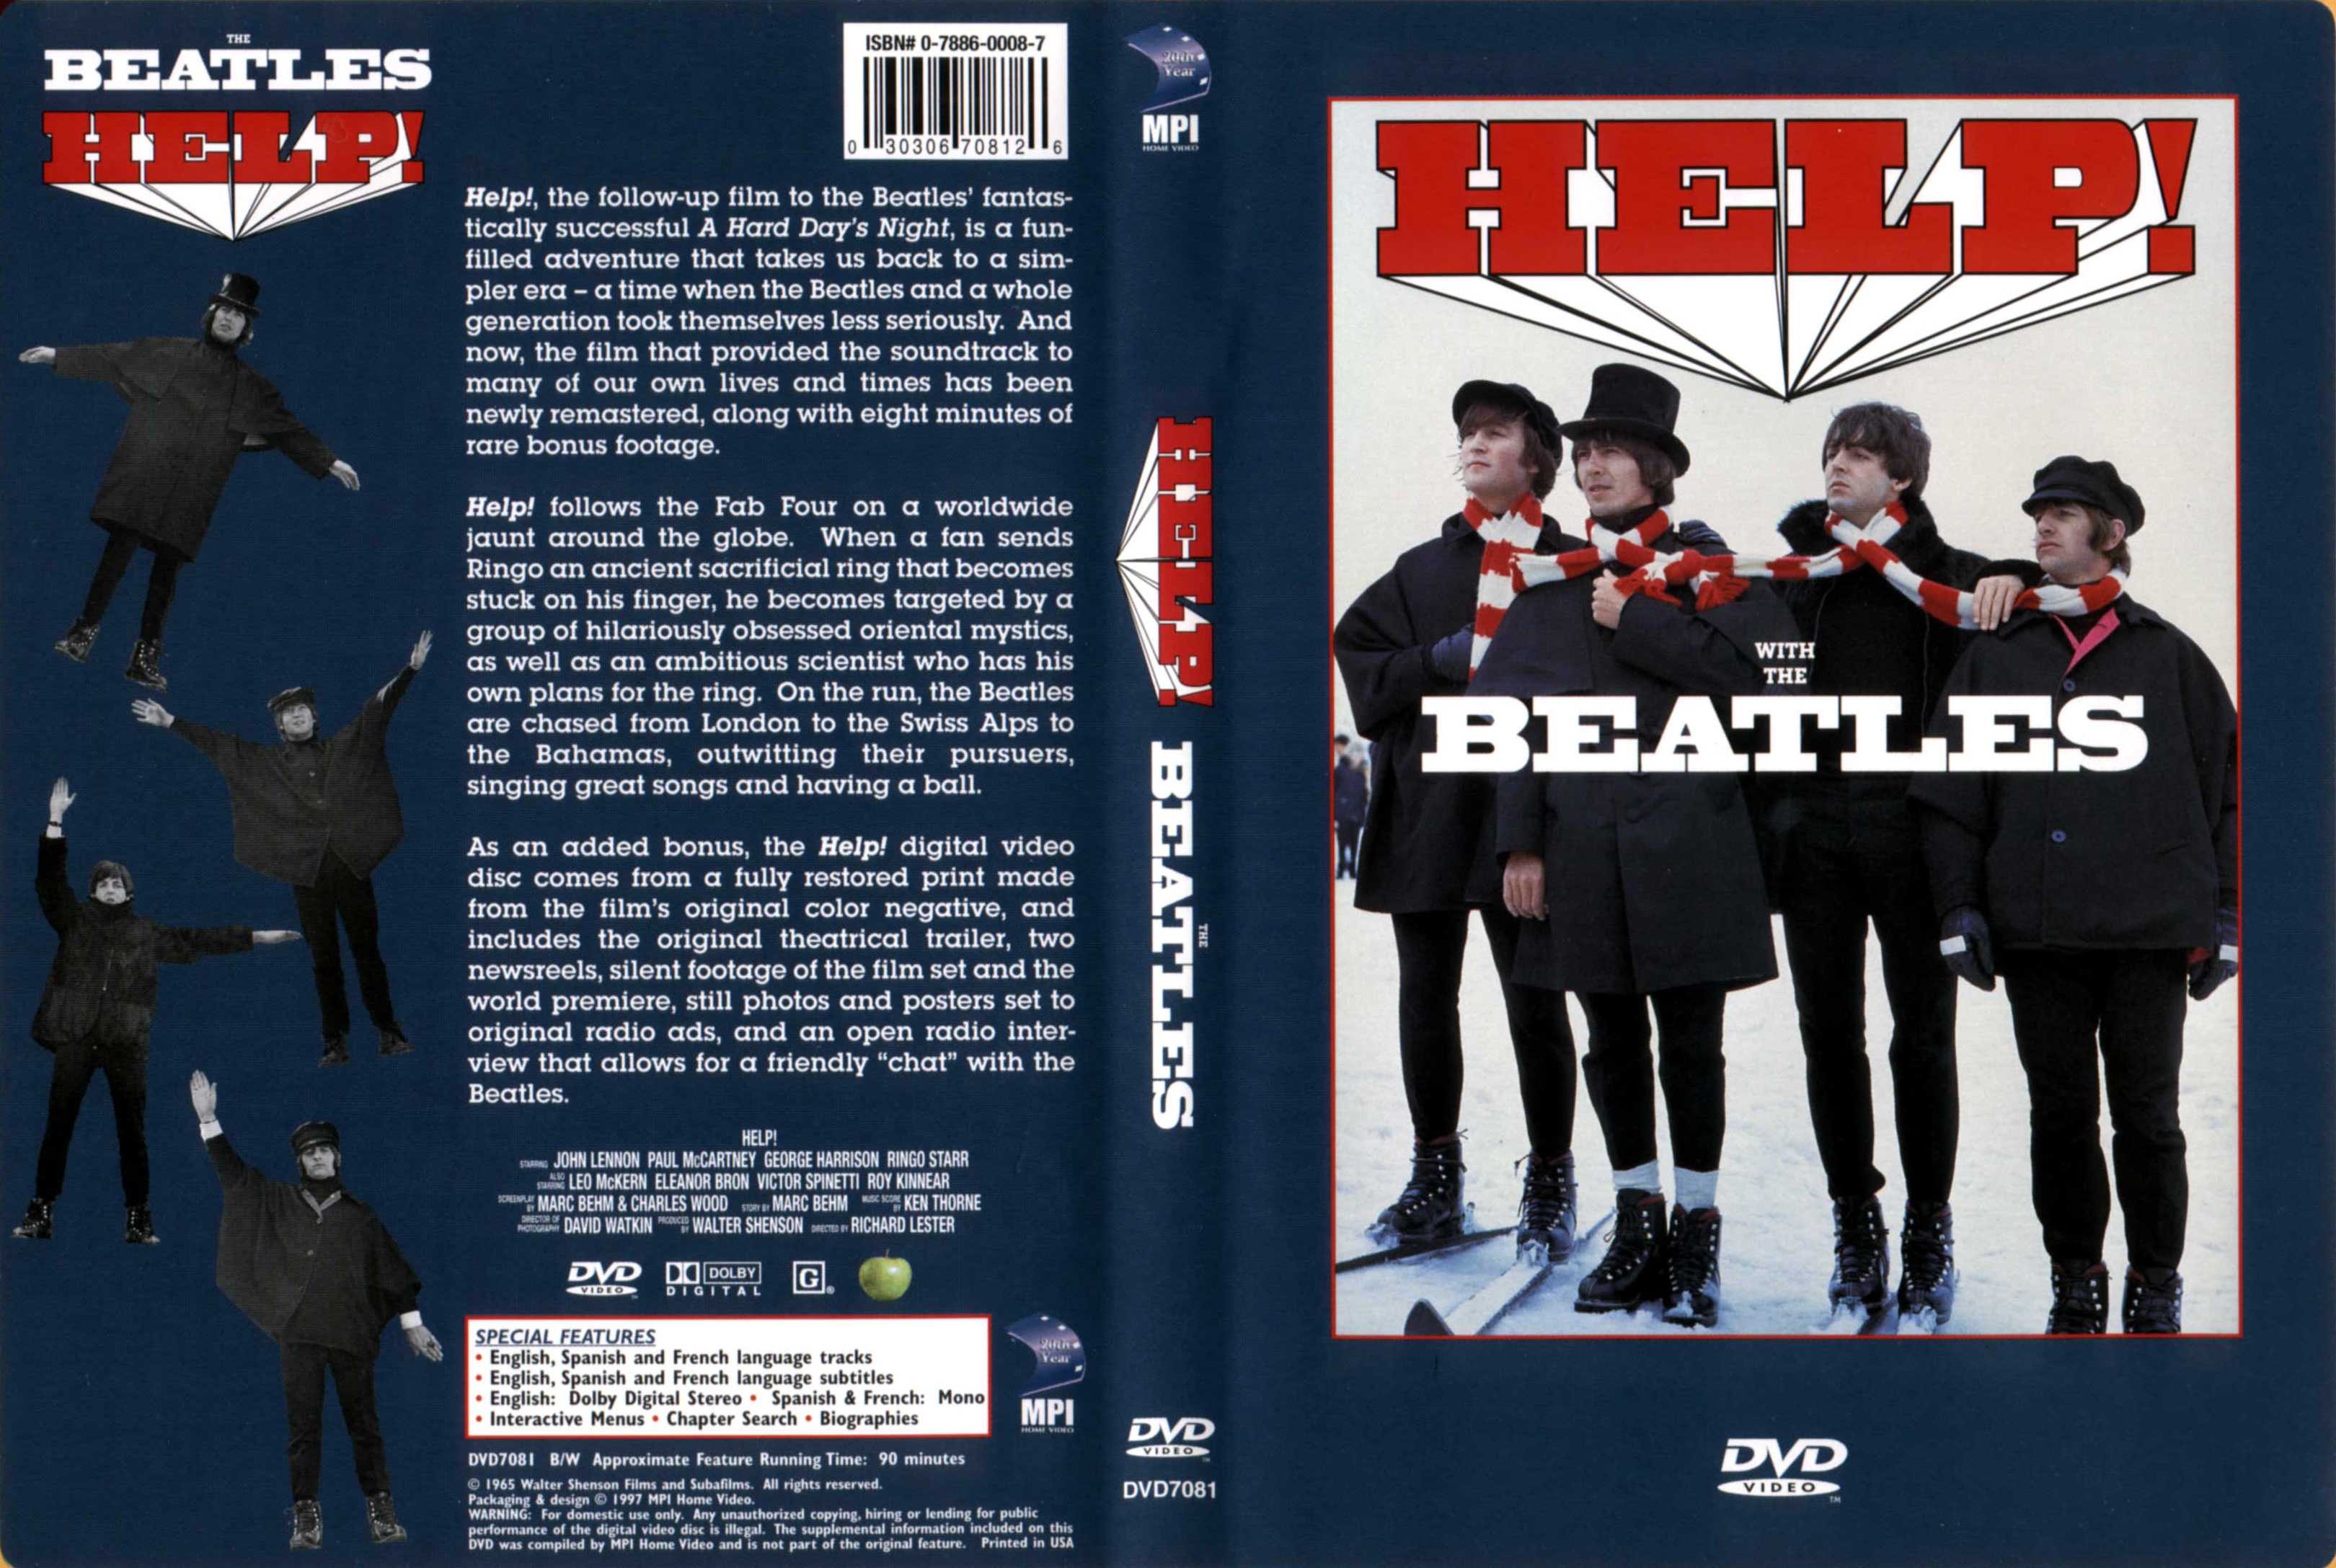 Jaquette DVD The Beatles help